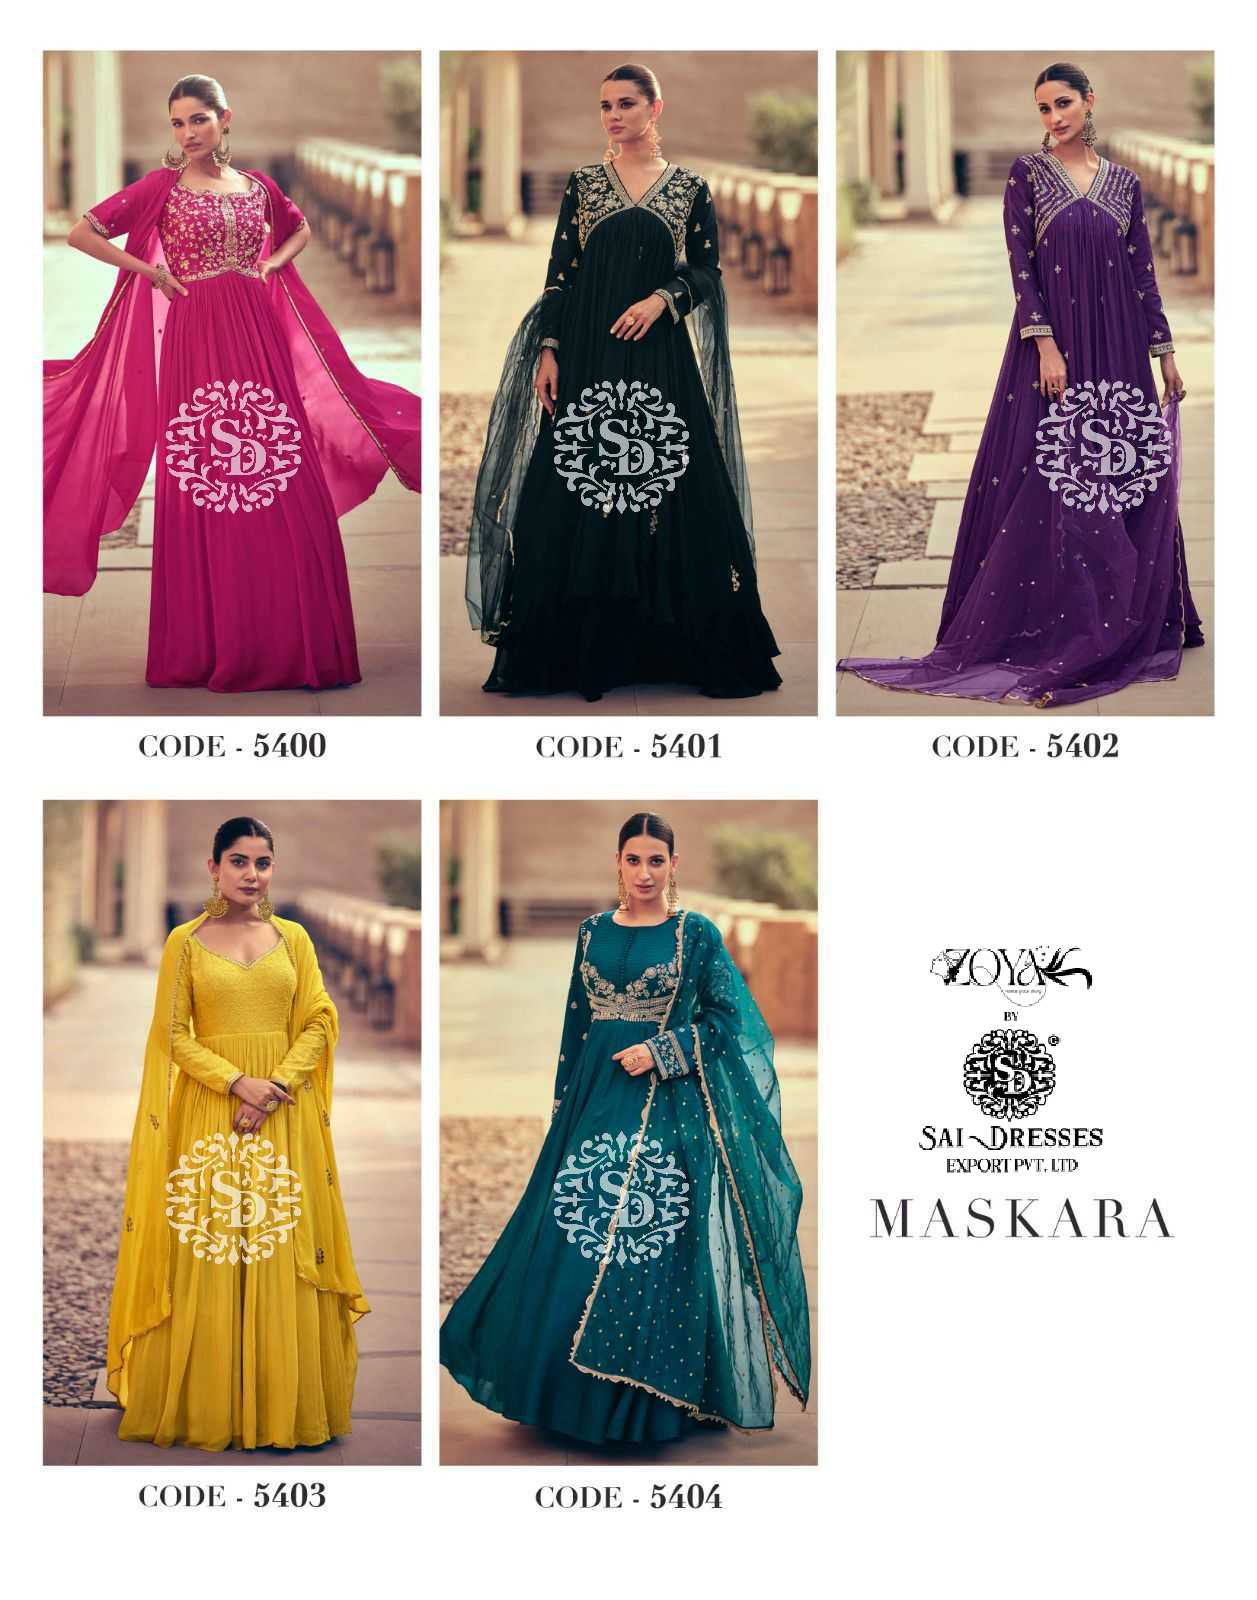 MASKARA PREMIUM CLASSY WEAR READYMADE HEAVY DESIGNER LONG GOWN WITH DUPATTA IN WHOLESALE RATE IN SURAT